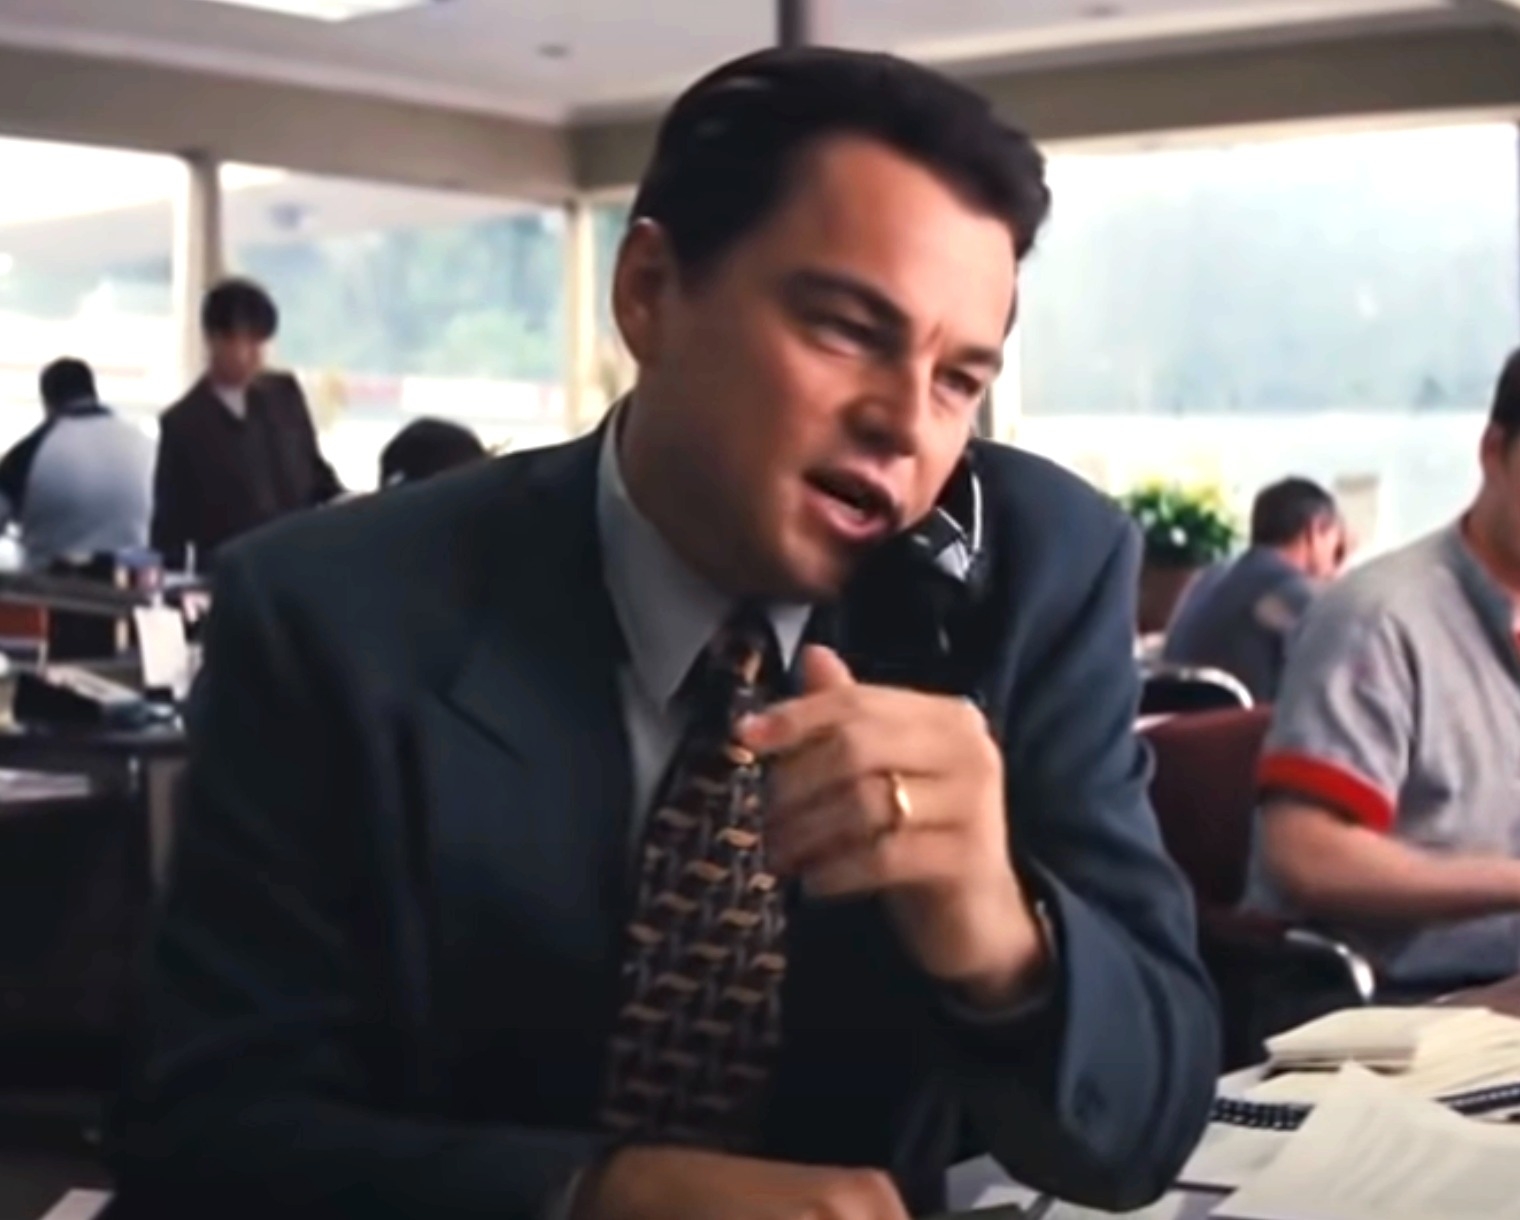 Screenshot from &quot;The Wolf of Wall Street&quot;